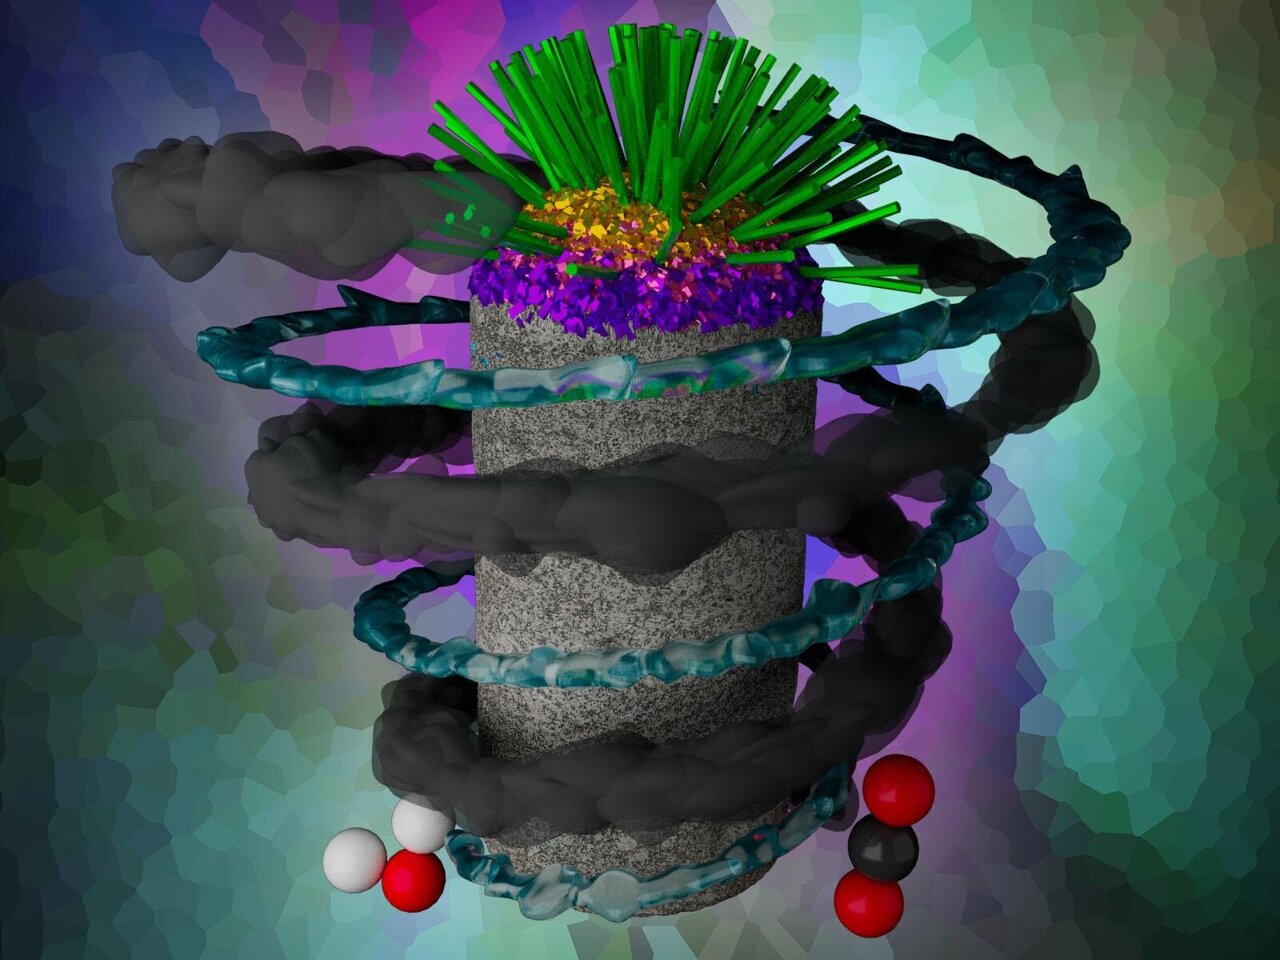 Mineralizing carbon dioxide underground is a potential carbon storage method. (Illustration by Cortland Johnson | Pacific Northwest National Laboratory)